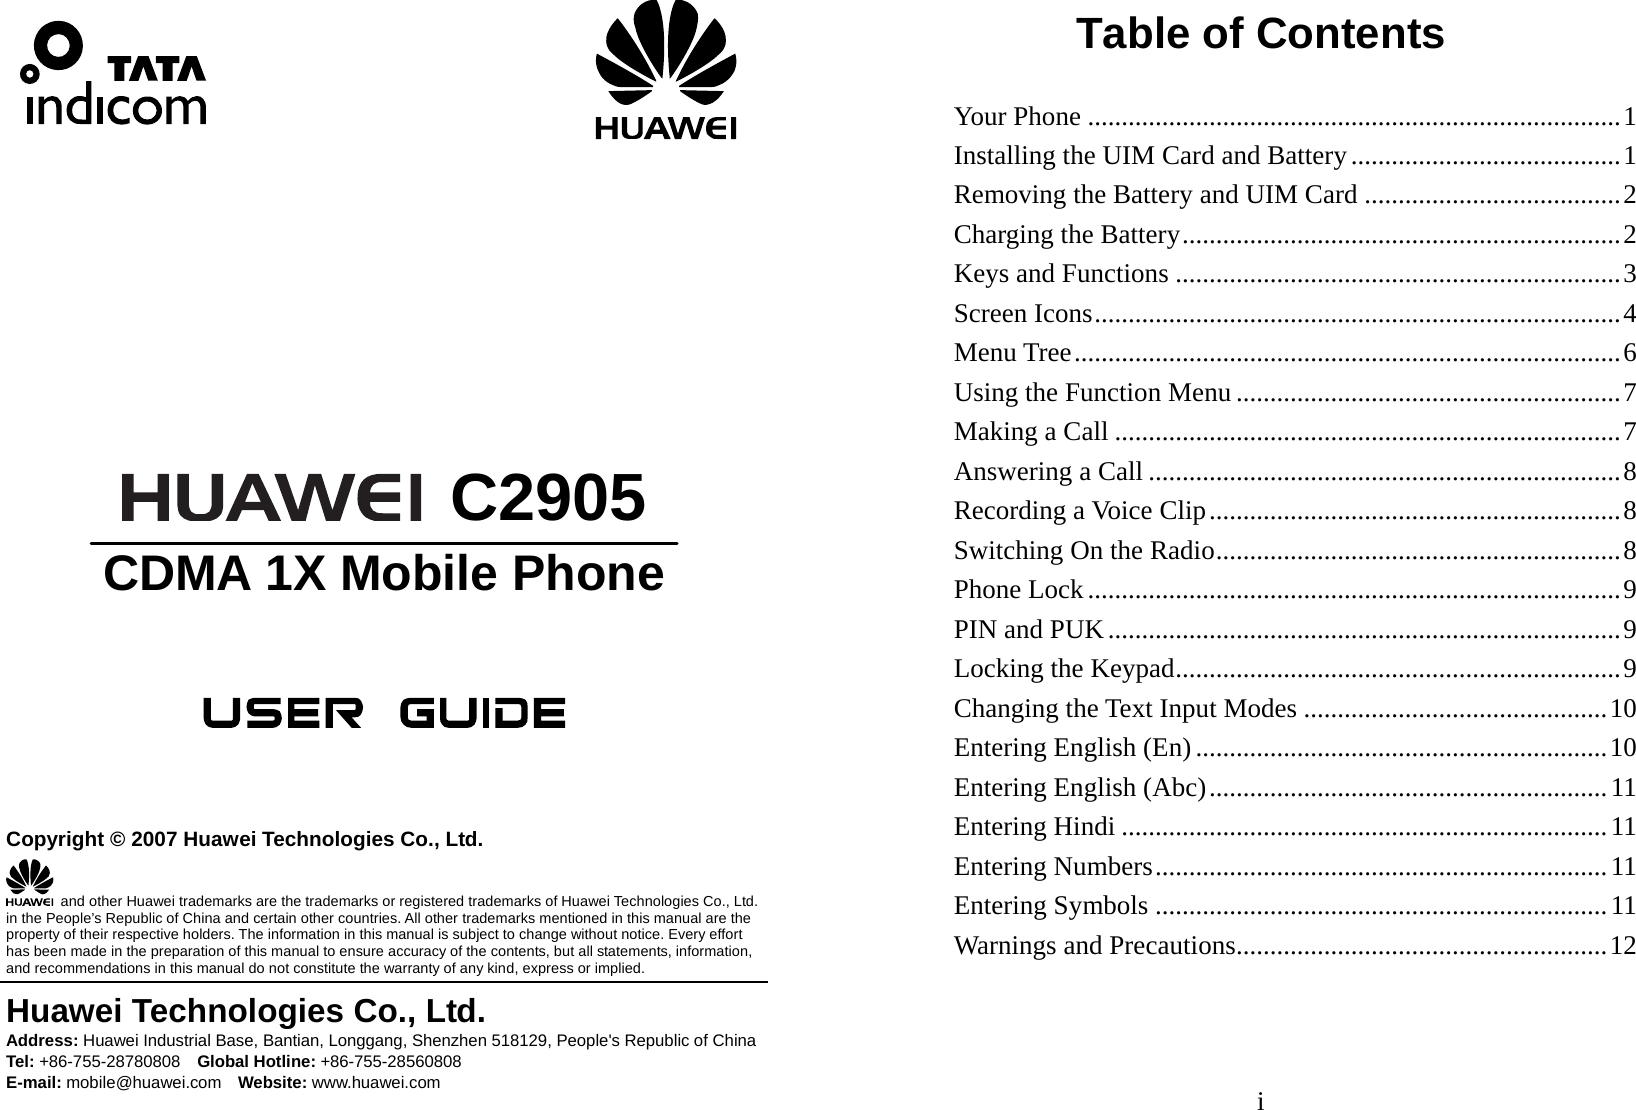                                   C2905 CDMA 1X Mobile Phone      Copyright © 2007 Huawei Technologies Co., Ltd.   and other Huawei trademarks are the trademarks or registered trademarks of Huawei Technologies Co., Ltd. in the People’s Republic of China and certain other countries. All other trademarks mentioned in this manual are the property of their respective holders. The information in this manual is subject to change without notice. Every effort has been made in the preparation of this manual to ensure accuracy of the contents, but all statements, information, and recommendations in this manual do not constitute the warranty of any kind, express or implied. Huawei Technologies Co., Ltd. Address: Huawei Industrial Base, Bantian, Longgang, Shenzhen 518129, People&apos;s Republic of China Tel: +86-755-28780808    Global Hotline: +86-755-28560808 E-mail: mobile@huawei.com    Website: www.huawei.com i Table of Contents Your Phone ...............................................................................1 Installing the UIM Card and Battery........................................1 Removing the Battery and UIM Card ......................................2 Charging the Battery.................................................................2 Keys and Functions ..................................................................3 Screen Icons..............................................................................4 Menu Tree.................................................................................6 Using the Function Menu .........................................................7 Making a Call ...........................................................................7 Answering a Call ......................................................................8 Recording a Voice Clip.............................................................8 Switching On the Radio............................................................8 Phone Lock...............................................................................9 PIN and PUK............................................................................9 Locking the Keypad..................................................................9 Changing the Text Input Modes .............................................10 Entering English (En) .............................................................10 Entering English (Abc)...........................................................11 Entering Hindi ........................................................................11 Entering Numbers...................................................................11 Entering Symbols ...................................................................11 Warnings and Precautions.......................................................12 